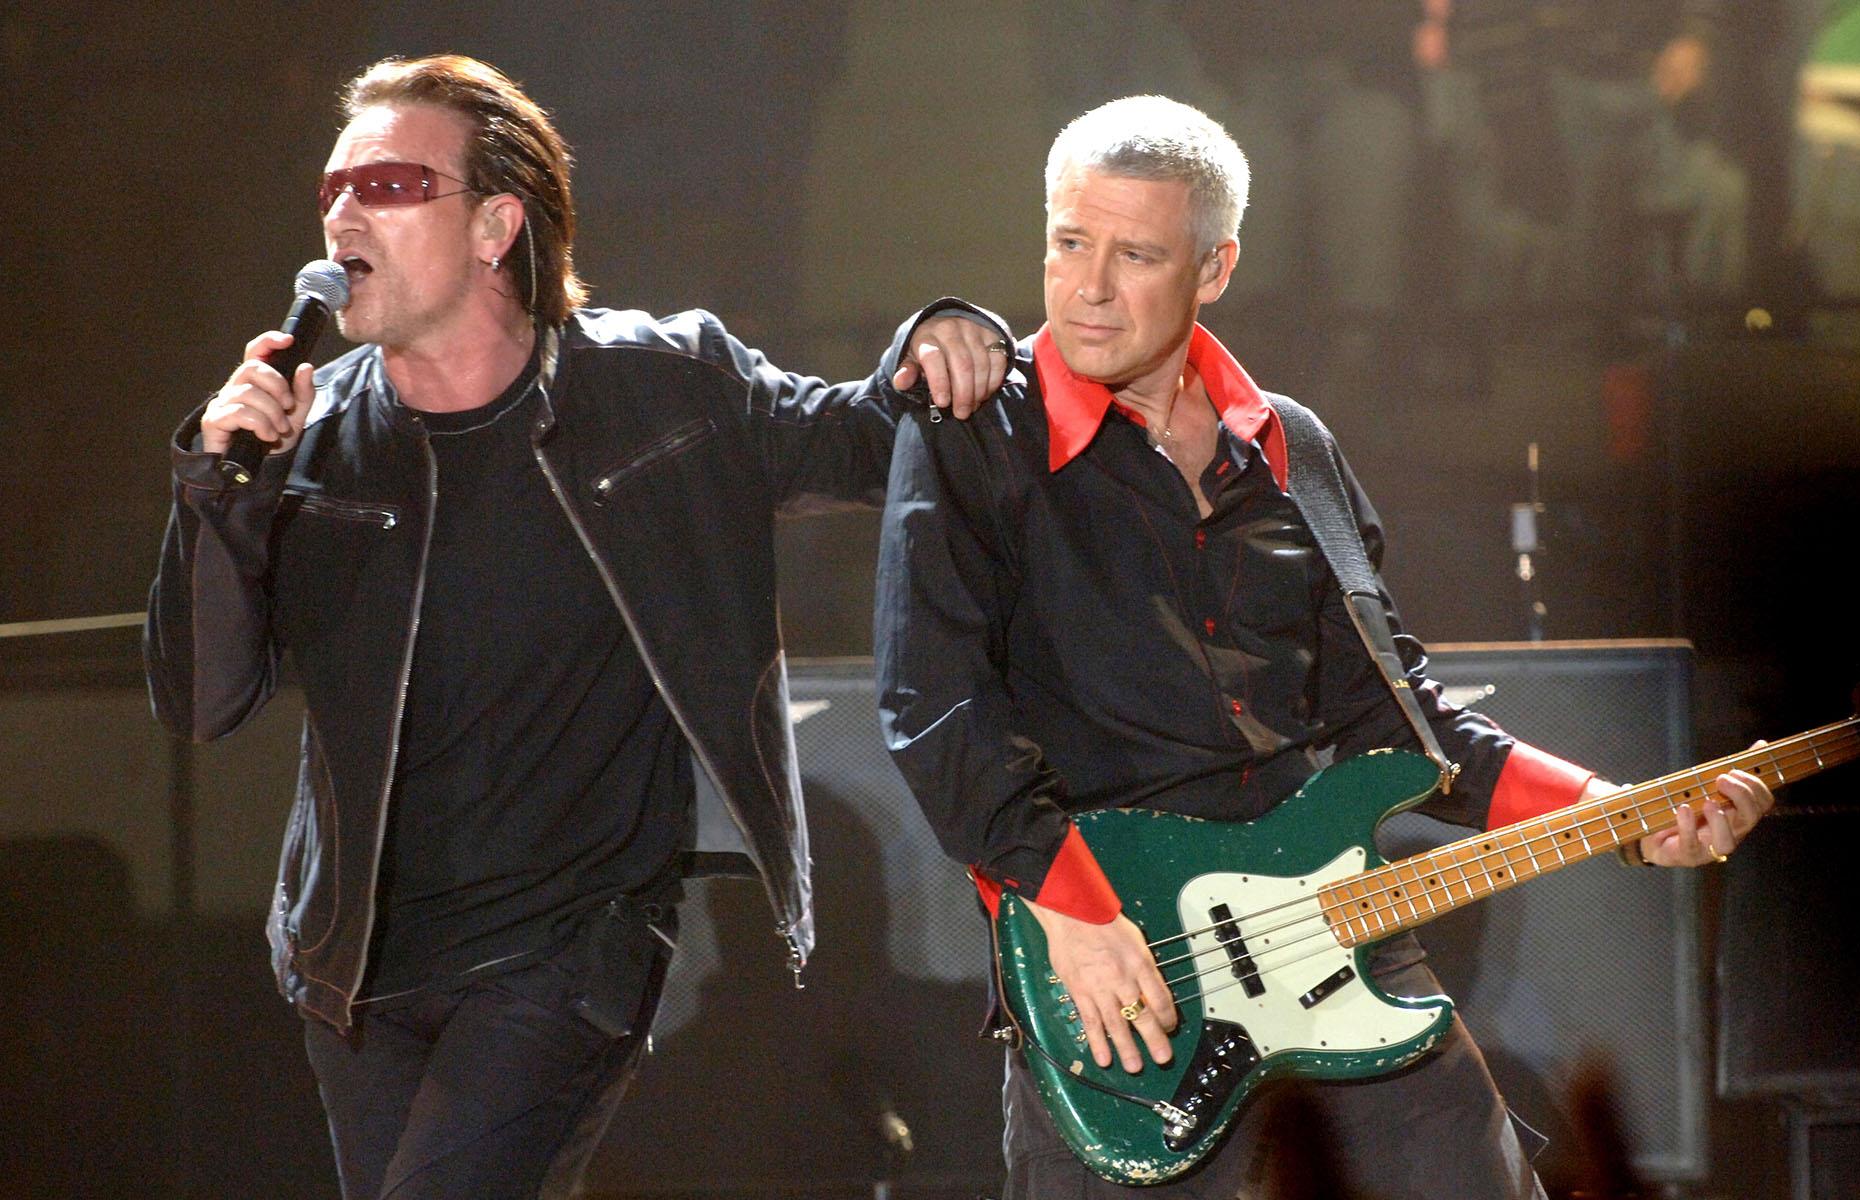 <p>Between 2005 and 2006, rock legends U2 embarked on their juggernaut <em>Vertigo Tour</em>. In support of their eleventh studio album, <em>How to Dismantle an Atomic Bomb</em>, the show spanned 131 shows across five continents.</p>  <p>With over 4.6 million tickets snapped up by avid fans, the tour grossed an epic $389 million, the equivalent of $613 million in 2024 money. At the time, it was the second-highest-grossing tour in history, solidifying U2's status as one of the most influential and enduring bands of all time.</p>  <p>Remarkably, and as impressive as the <em>Vertigo Tour</em> was, it isn't U2's highest-earning tour to date. More on that later...</p>